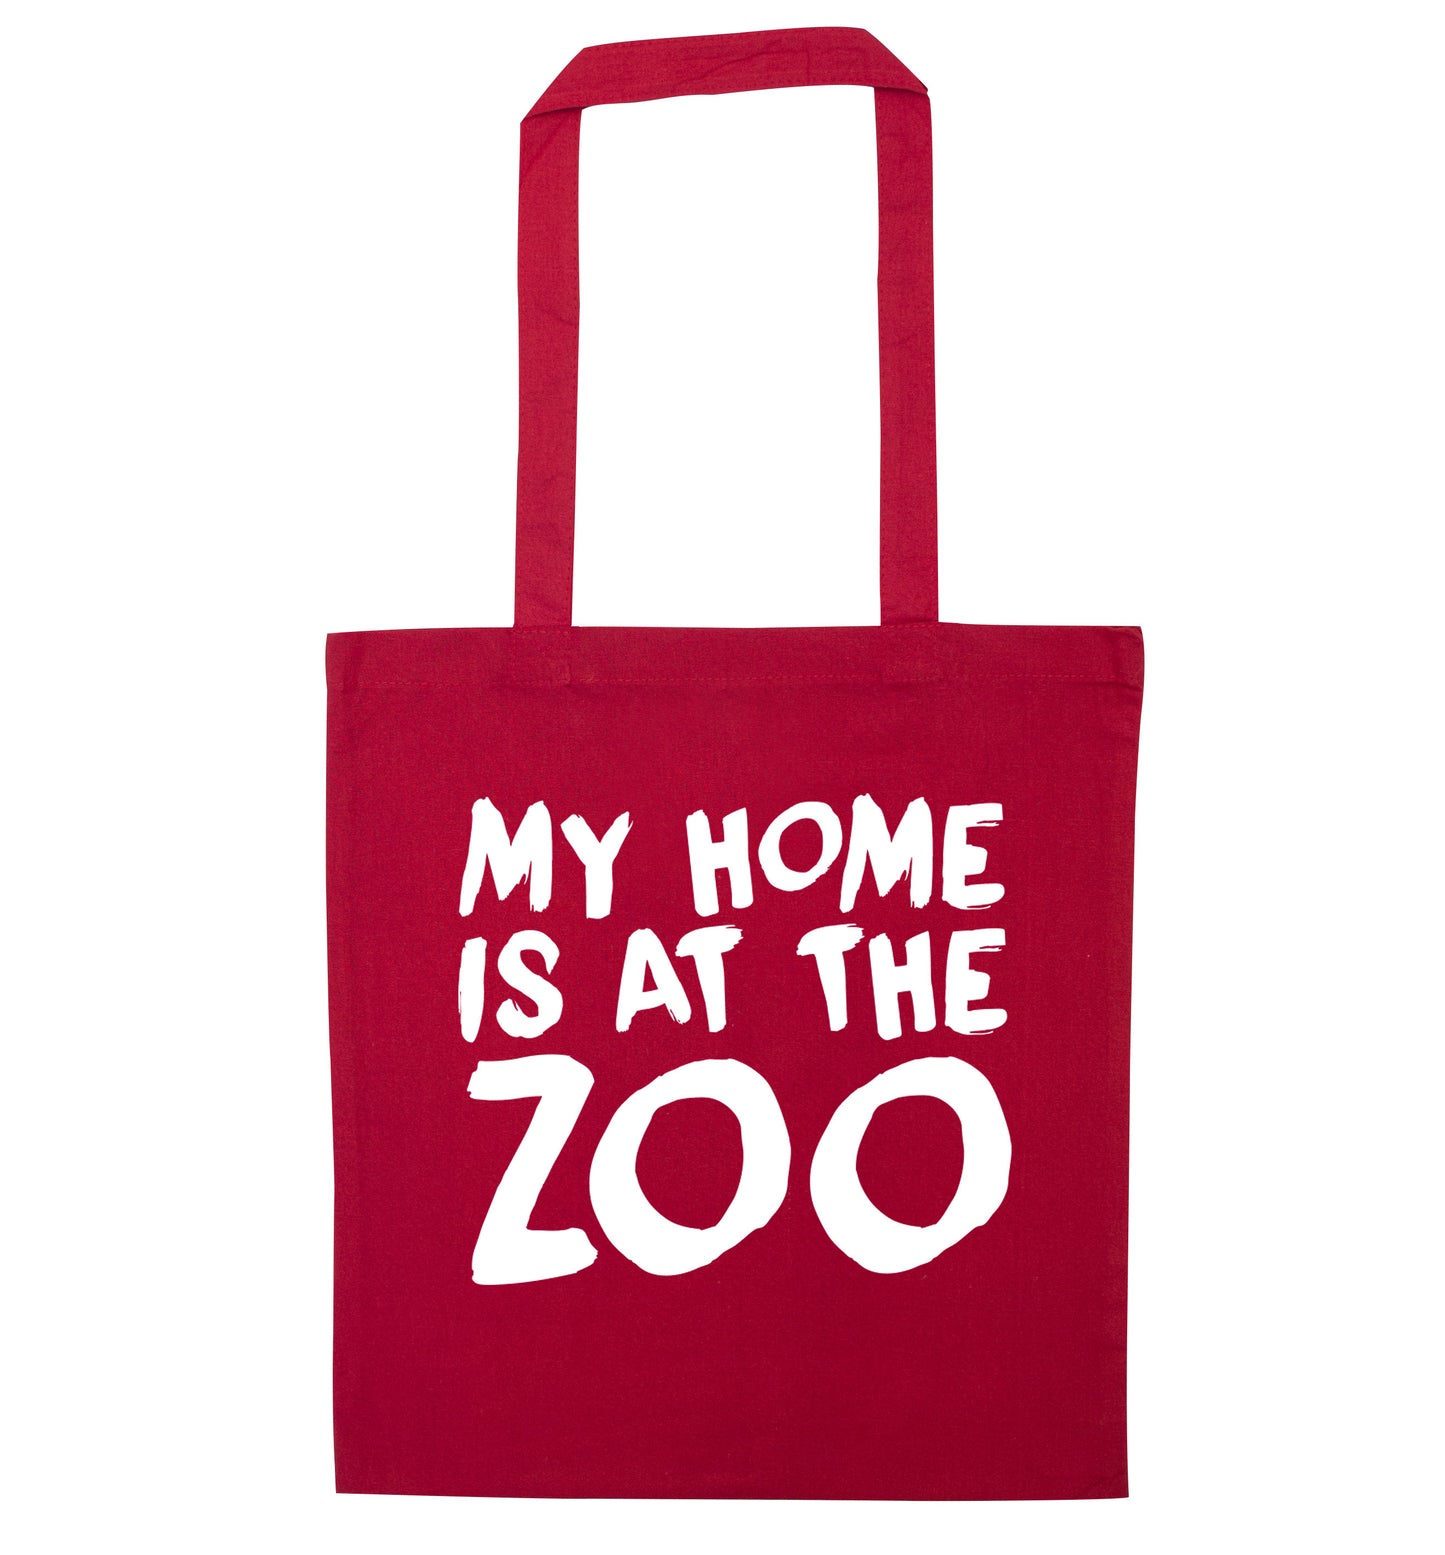 My home is at the zoo red tote bag